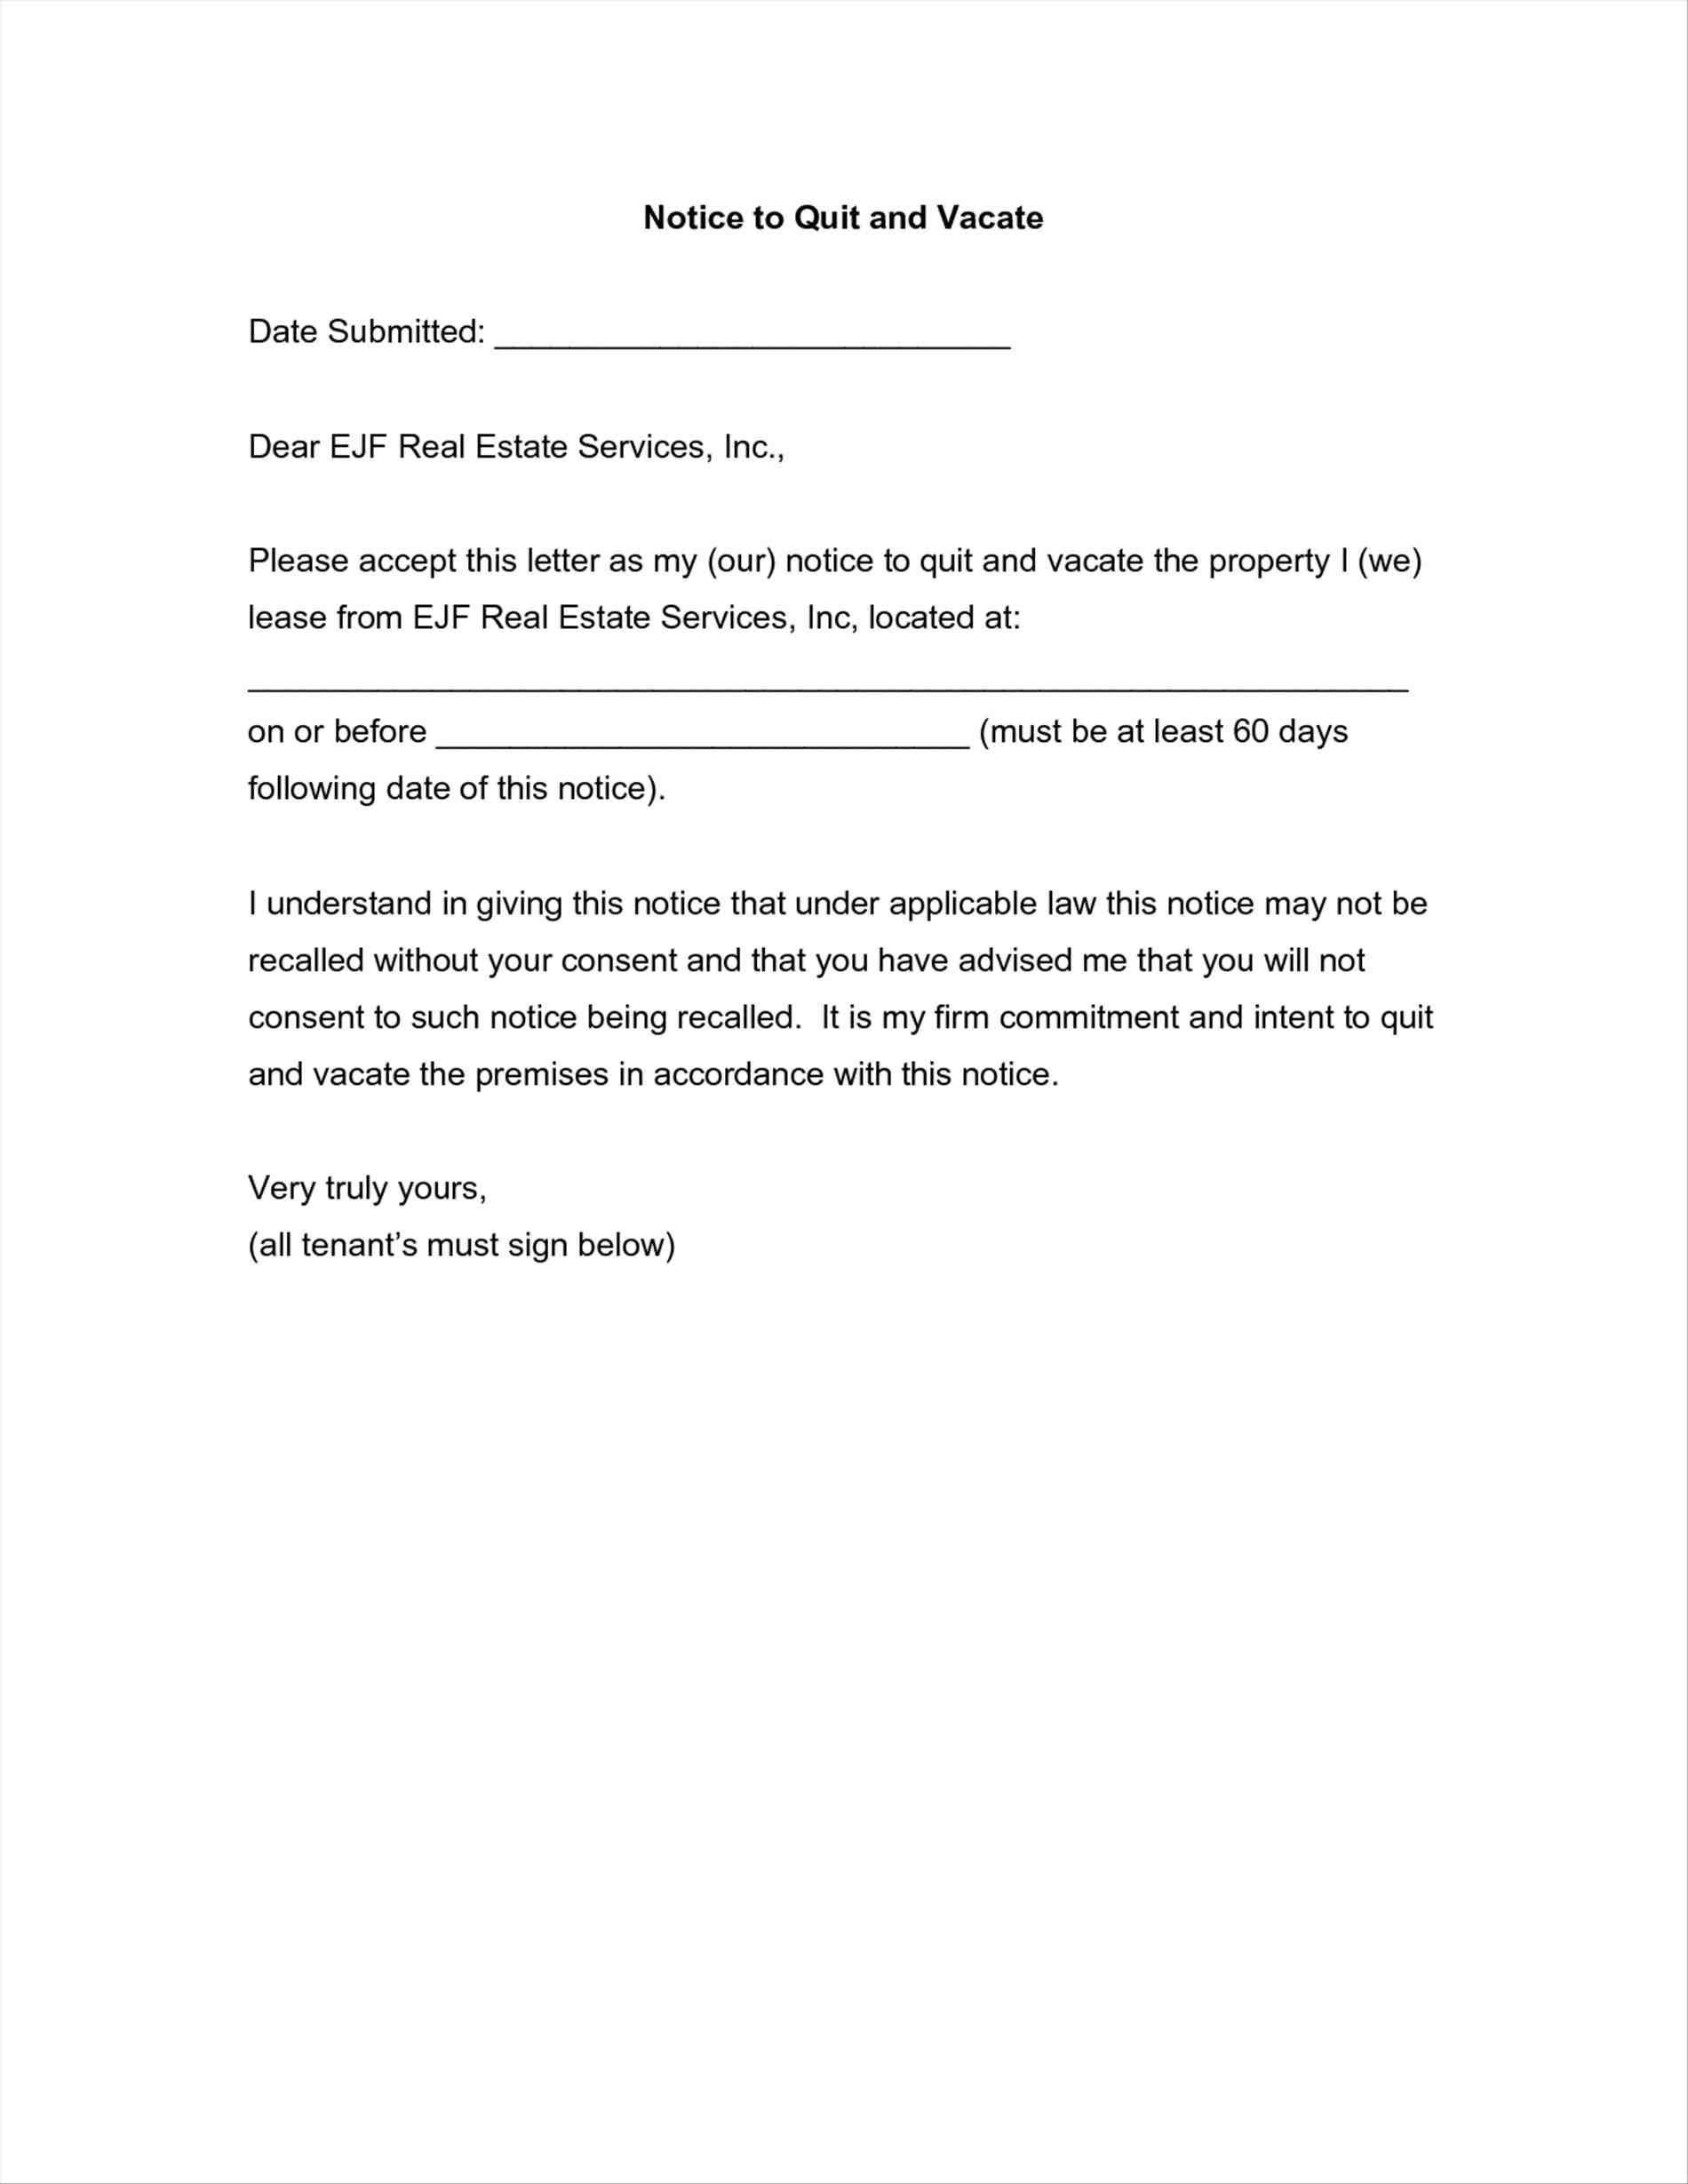 Apartment Offer Letter Template - Template for 60 Day Notice to Vacate